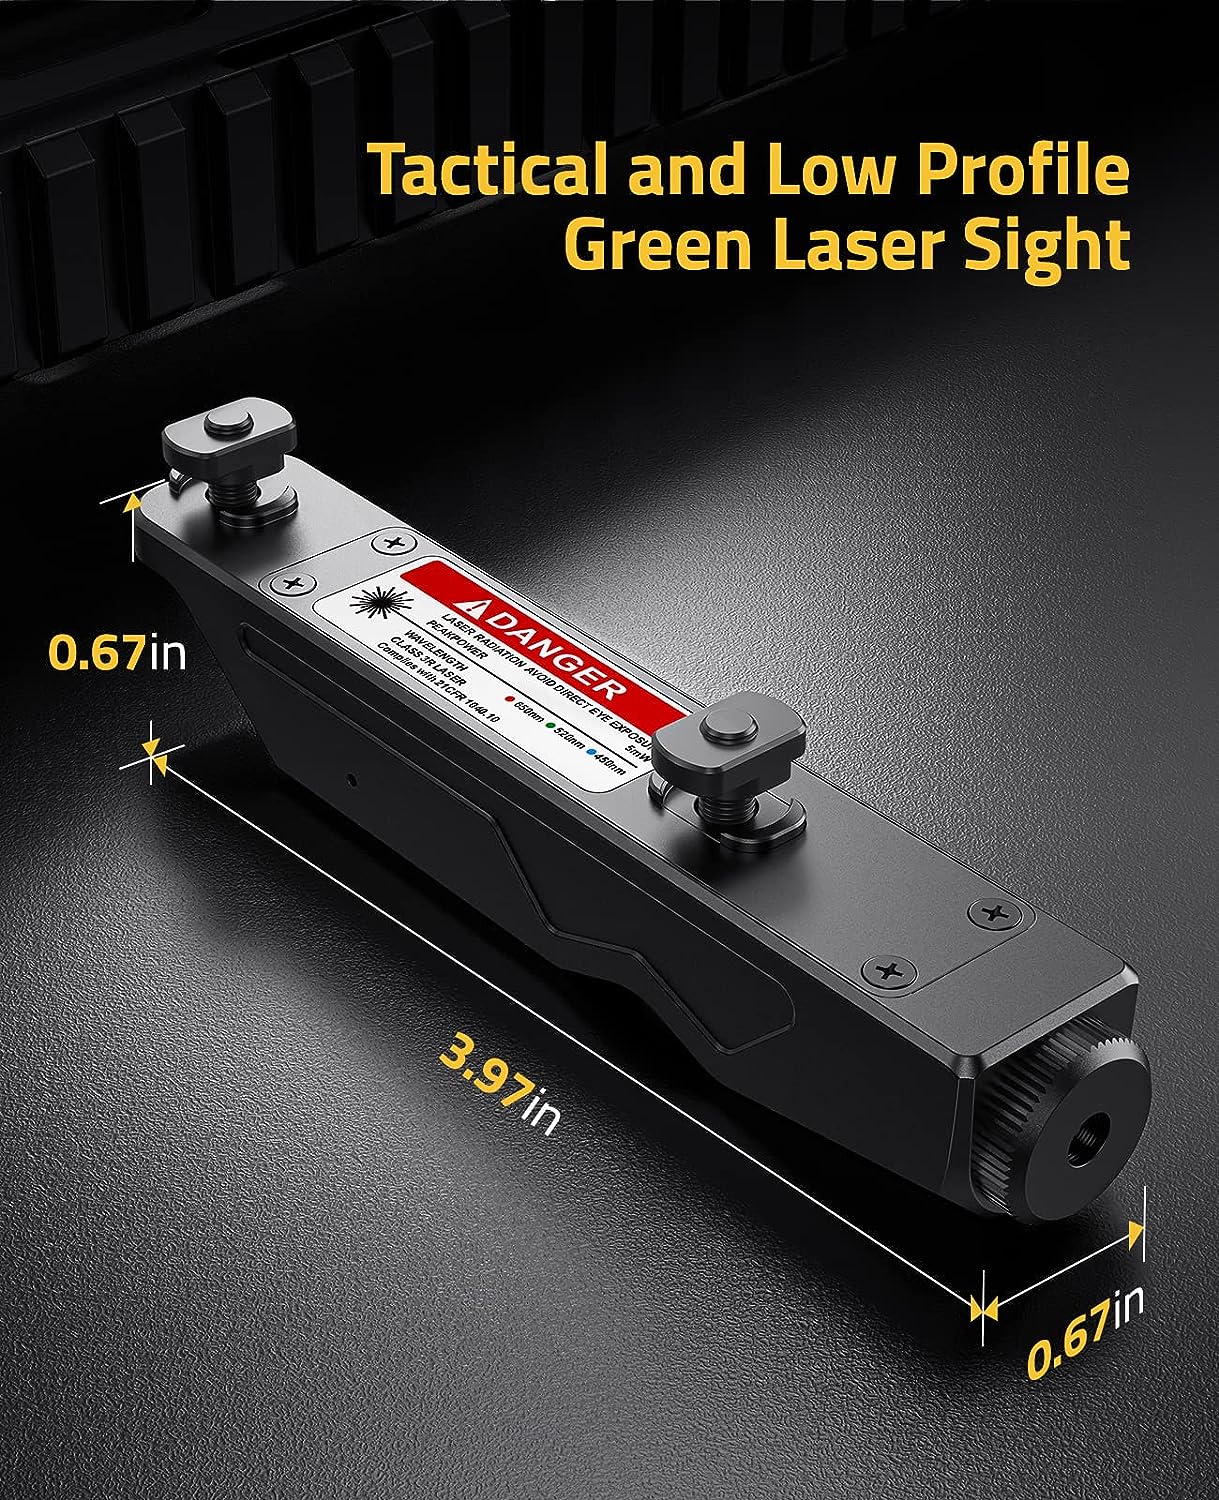 CVLIFE Green Laser Sight Compatible with M-Lok and Picatinny Rail